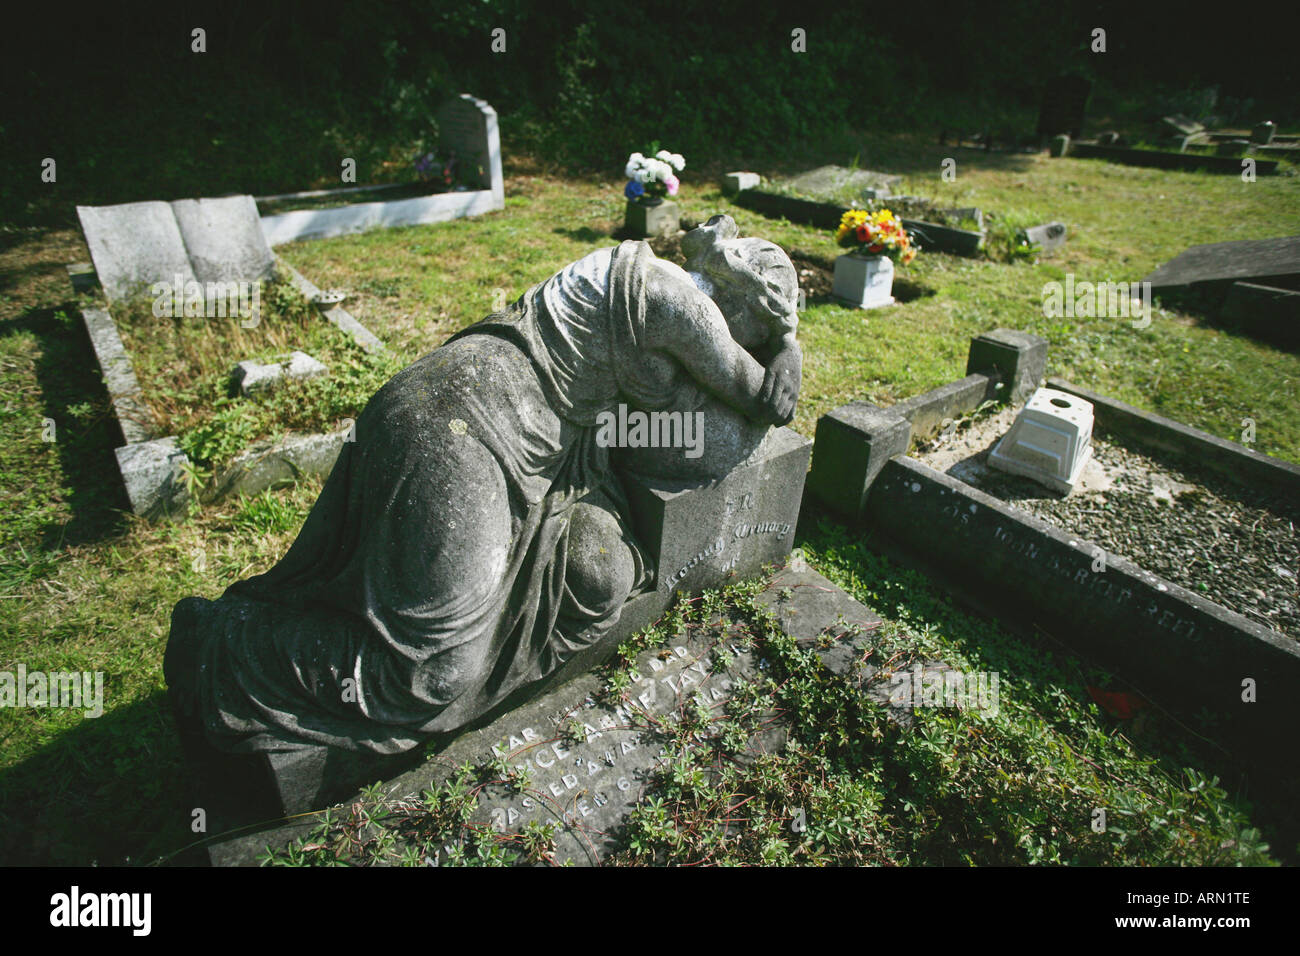 Statue of weeping woman in a cemetary, Essex, England, UK. Stock Photo